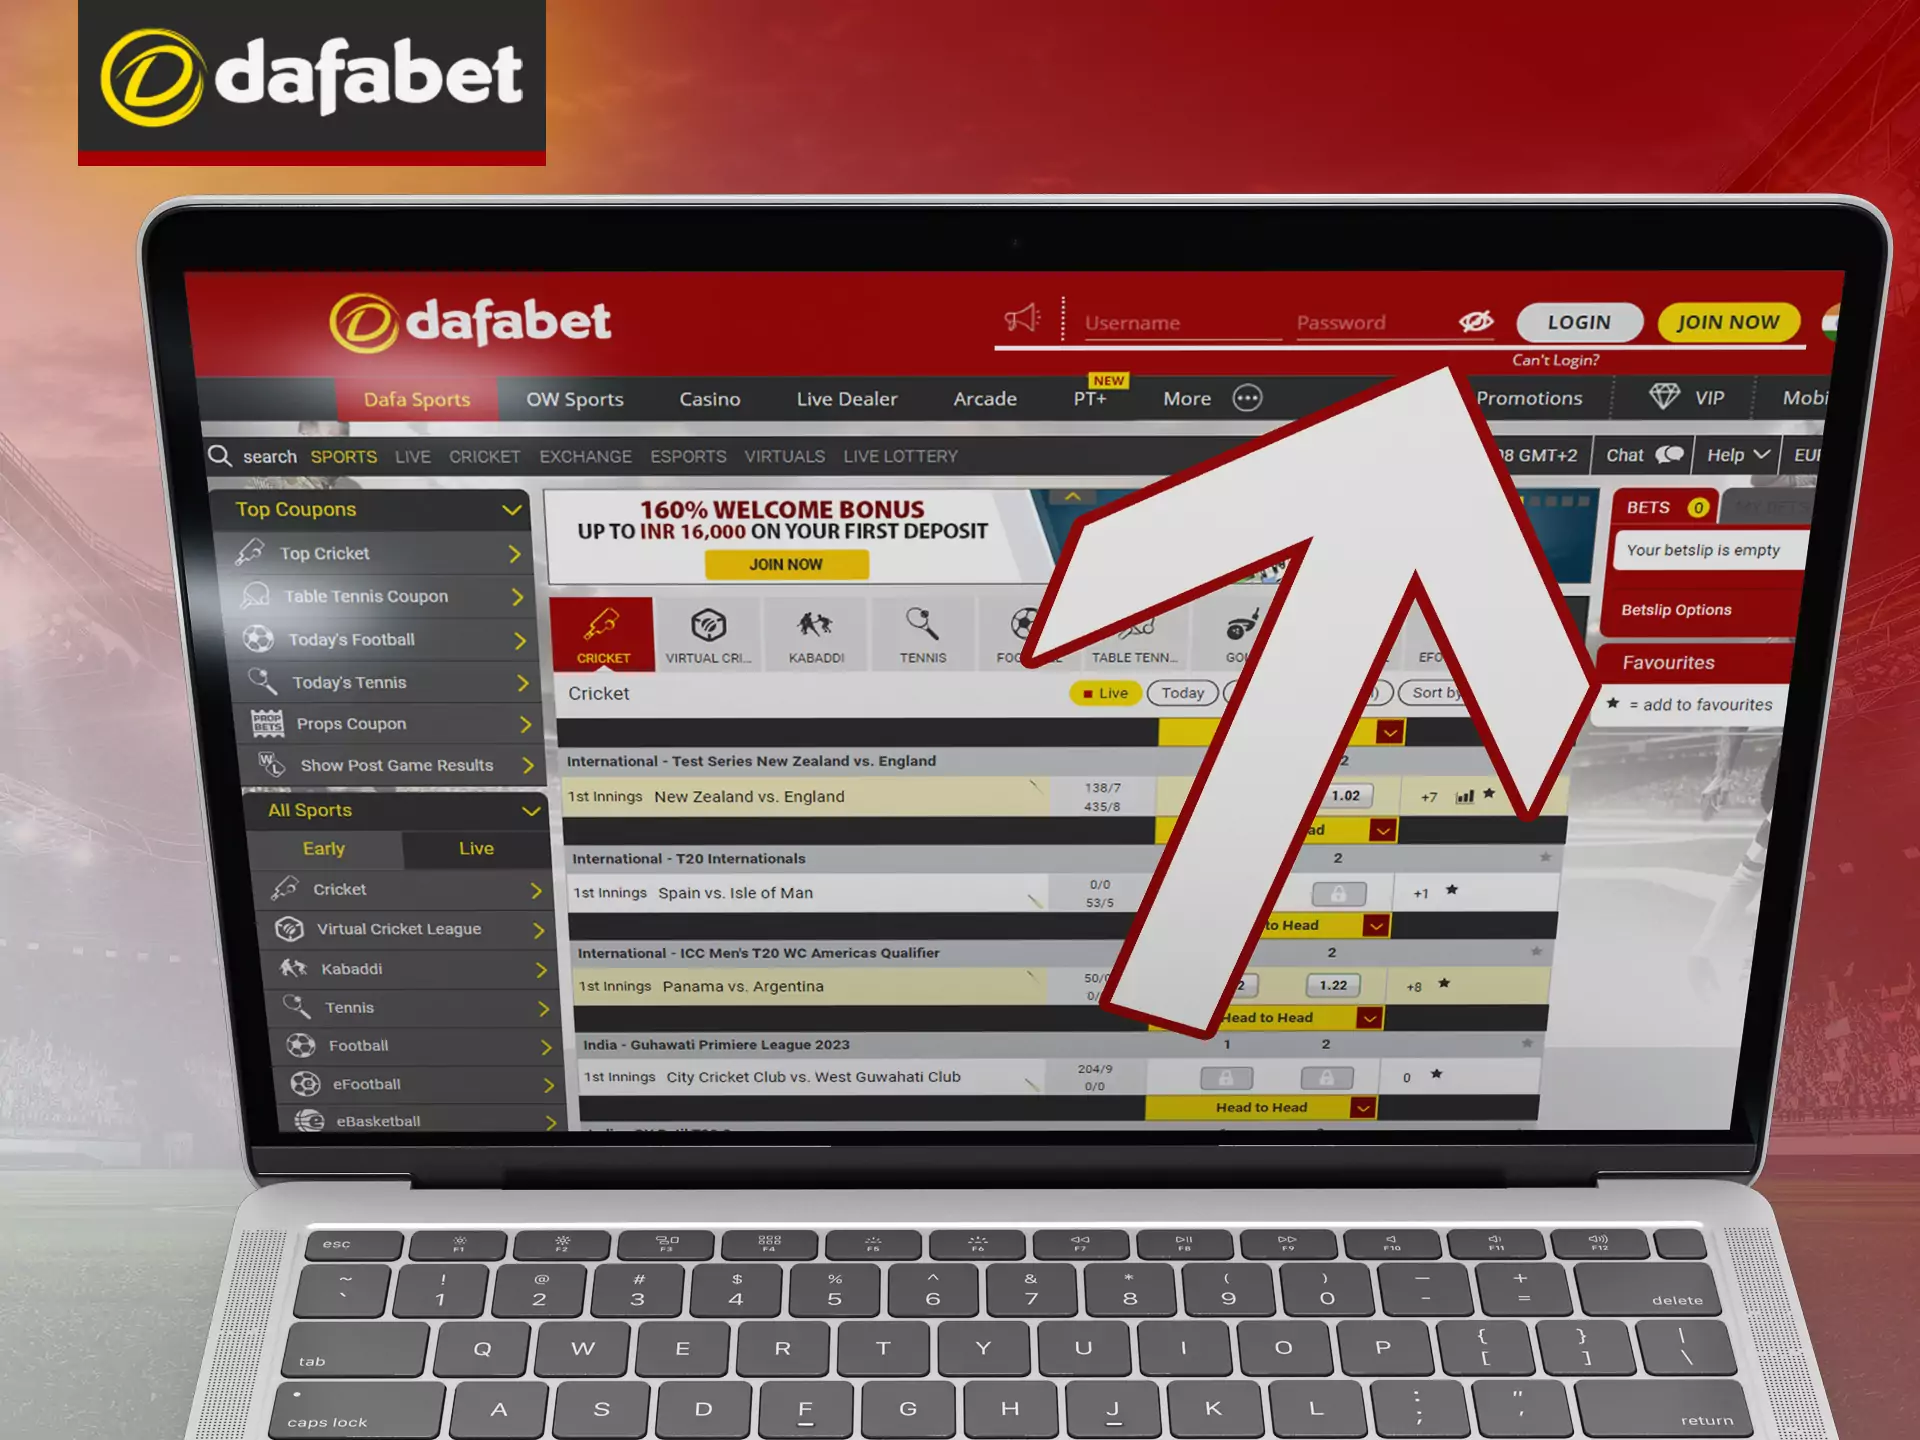 Log in to your Dafabet account to take best advantage of all the benefits.